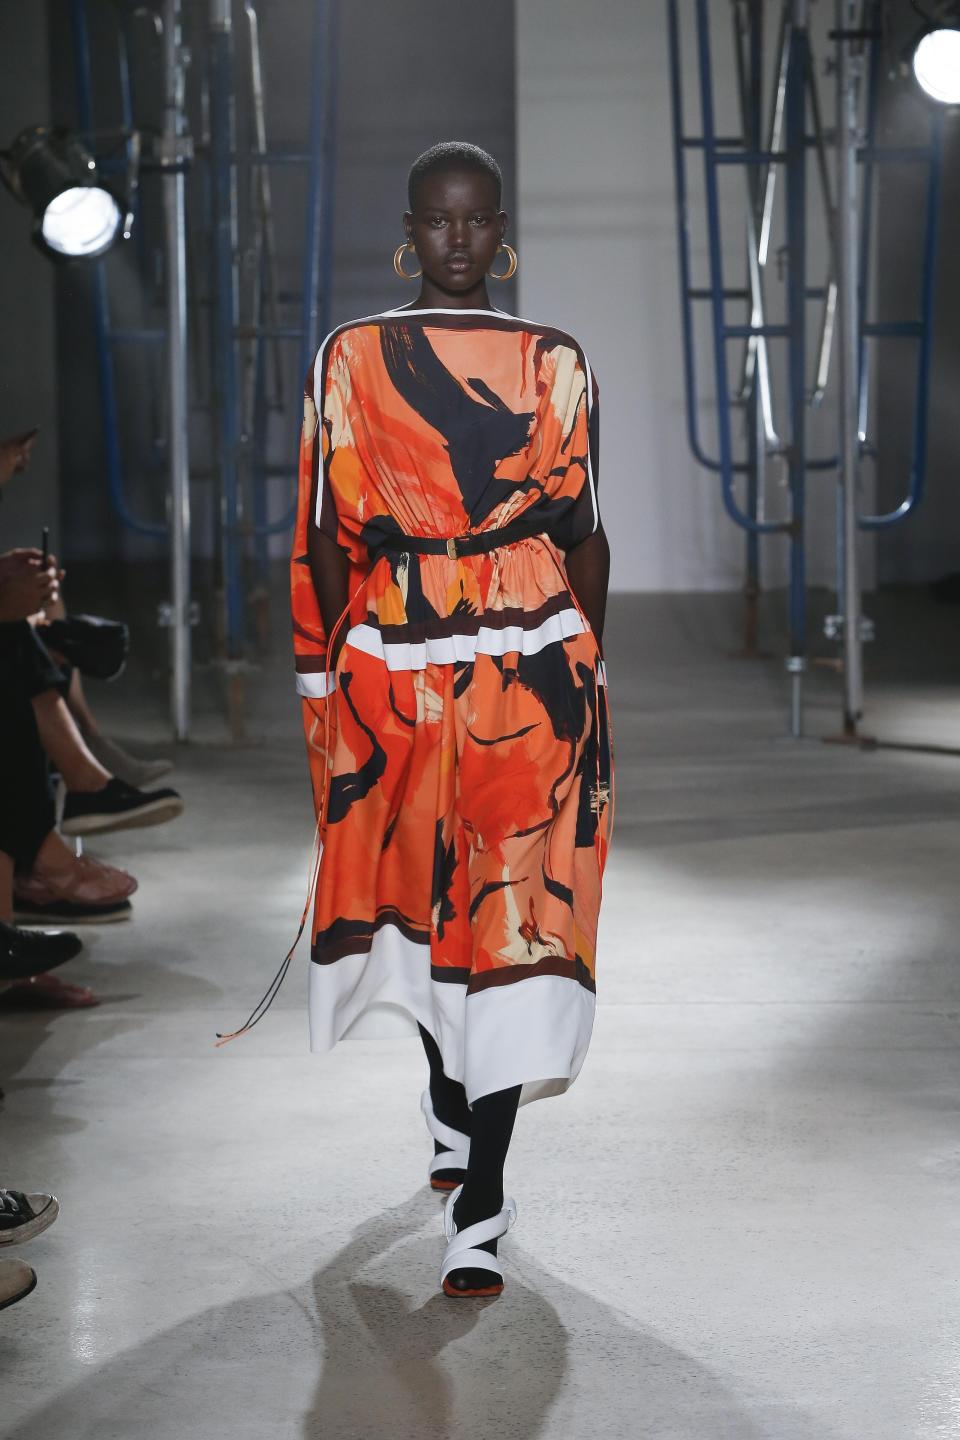 This Sept. 10, 2019 photo released by Proenza Schouler shows a model wearing clothing from their Spring/Summer 2020 collection during Fashion Week in New York. (Monica Feudi/Proenza Schouler via AP)